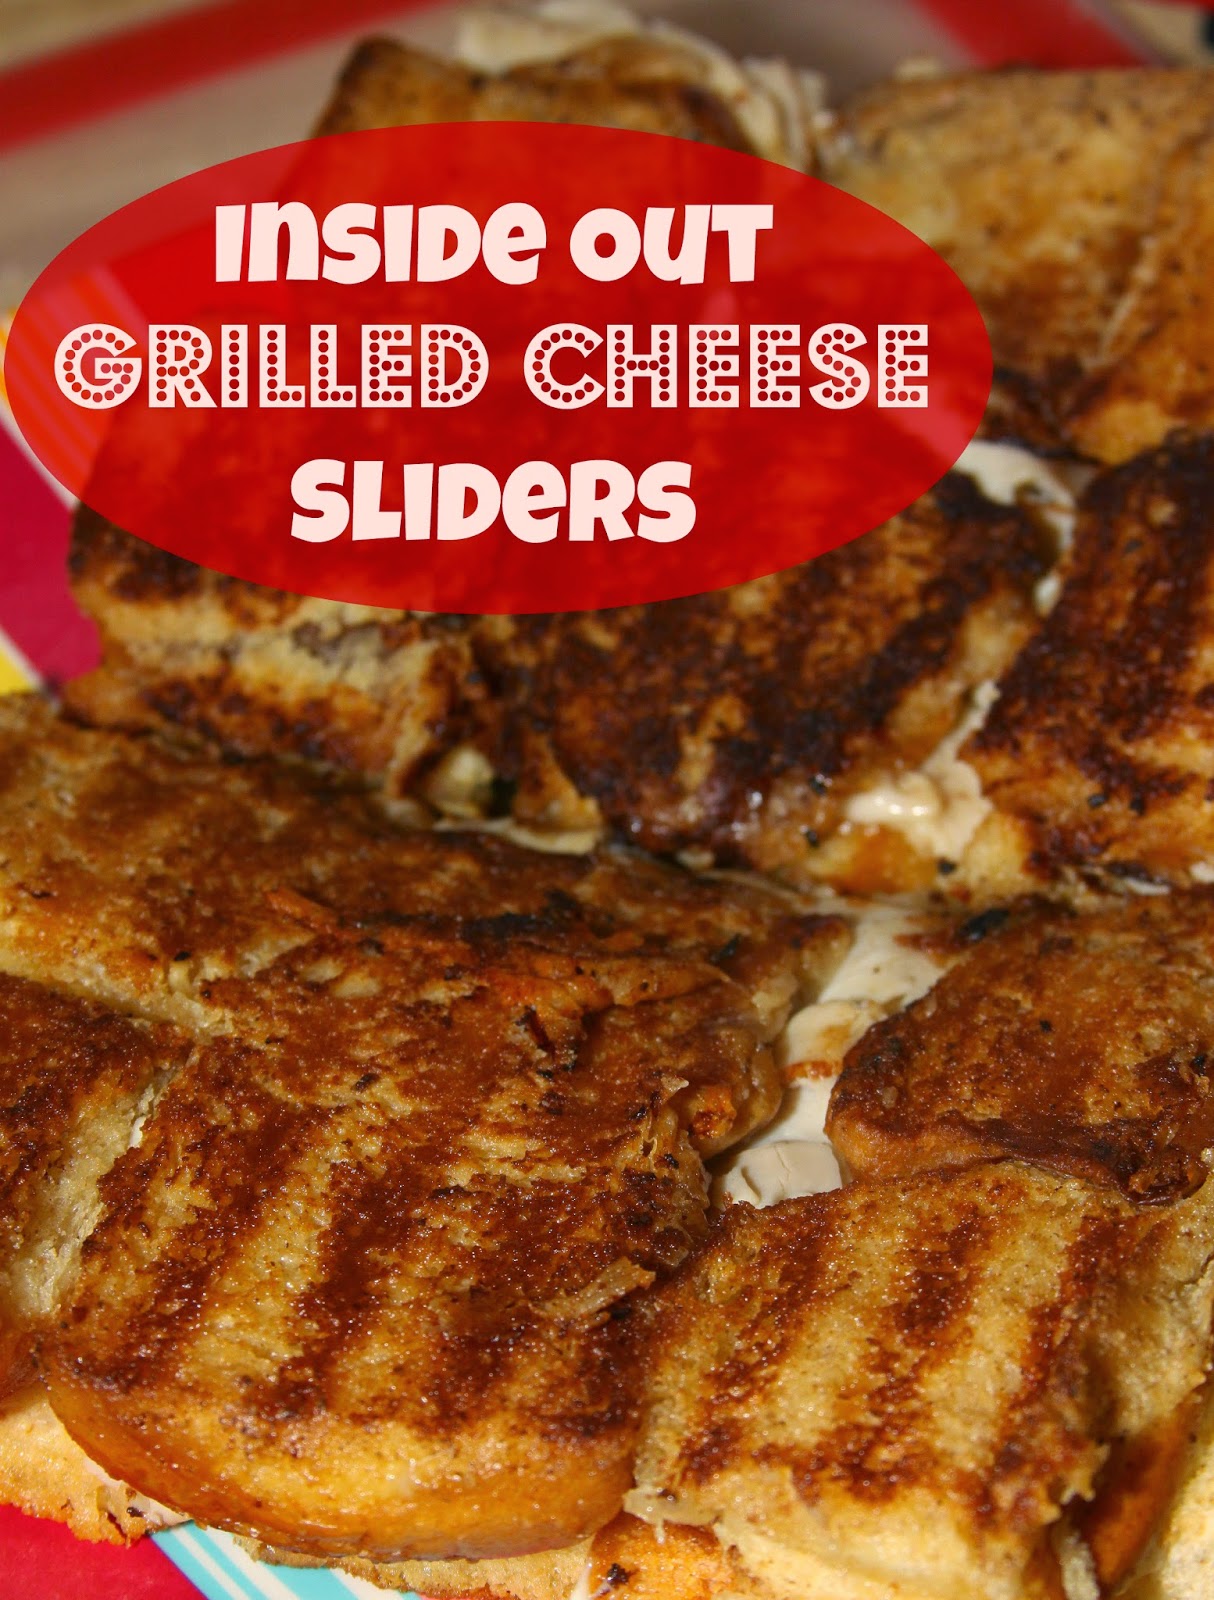 Inside Out Grilled Cheese Sliders